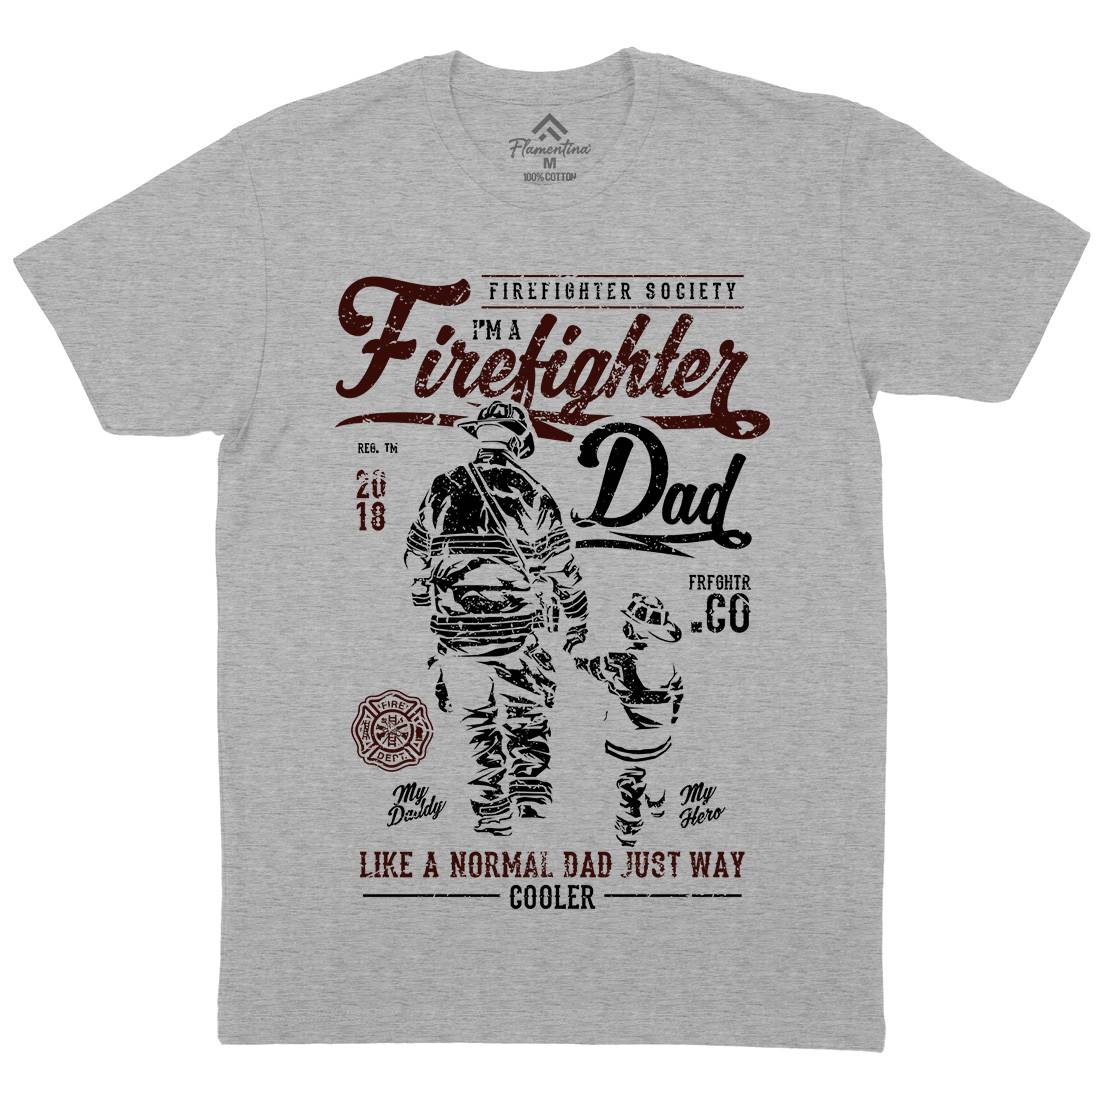 Dad Mens Crew Neck T-Shirt Firefighters A657